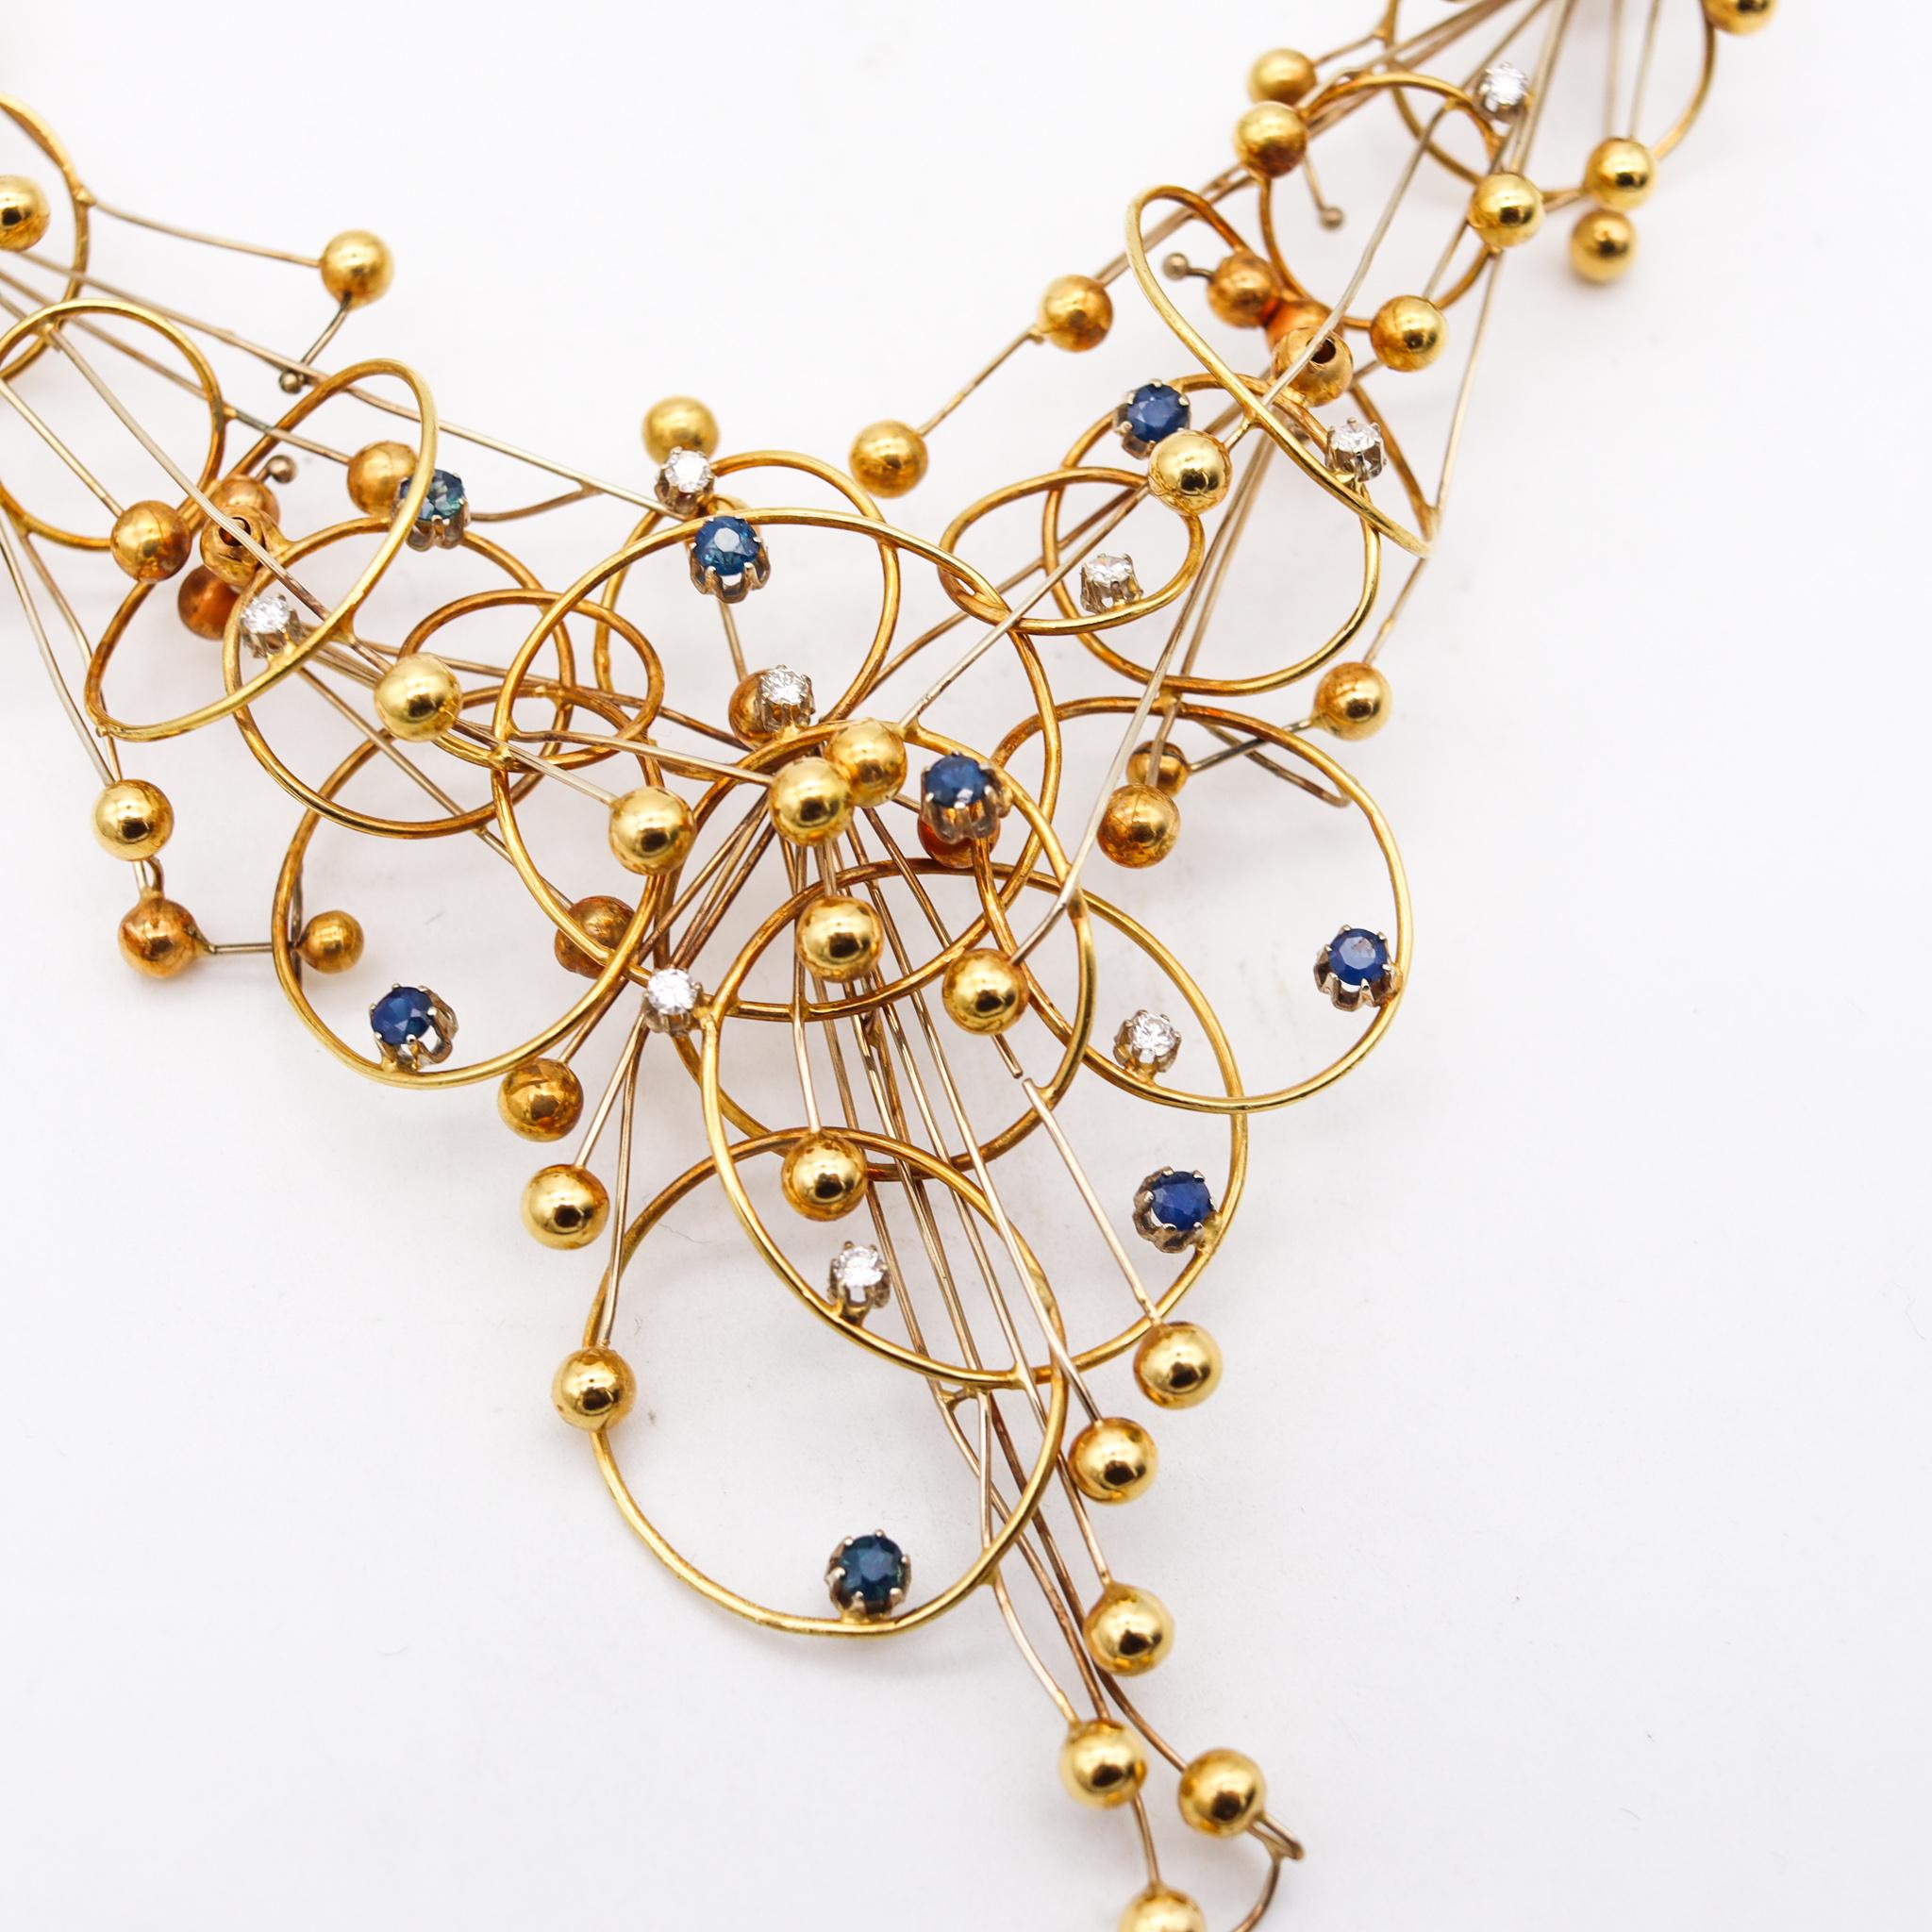 Women's Modernist Studio 1970 Geometric Necklace In 18Kt Gold With Diamonds & Sapphires For Sale